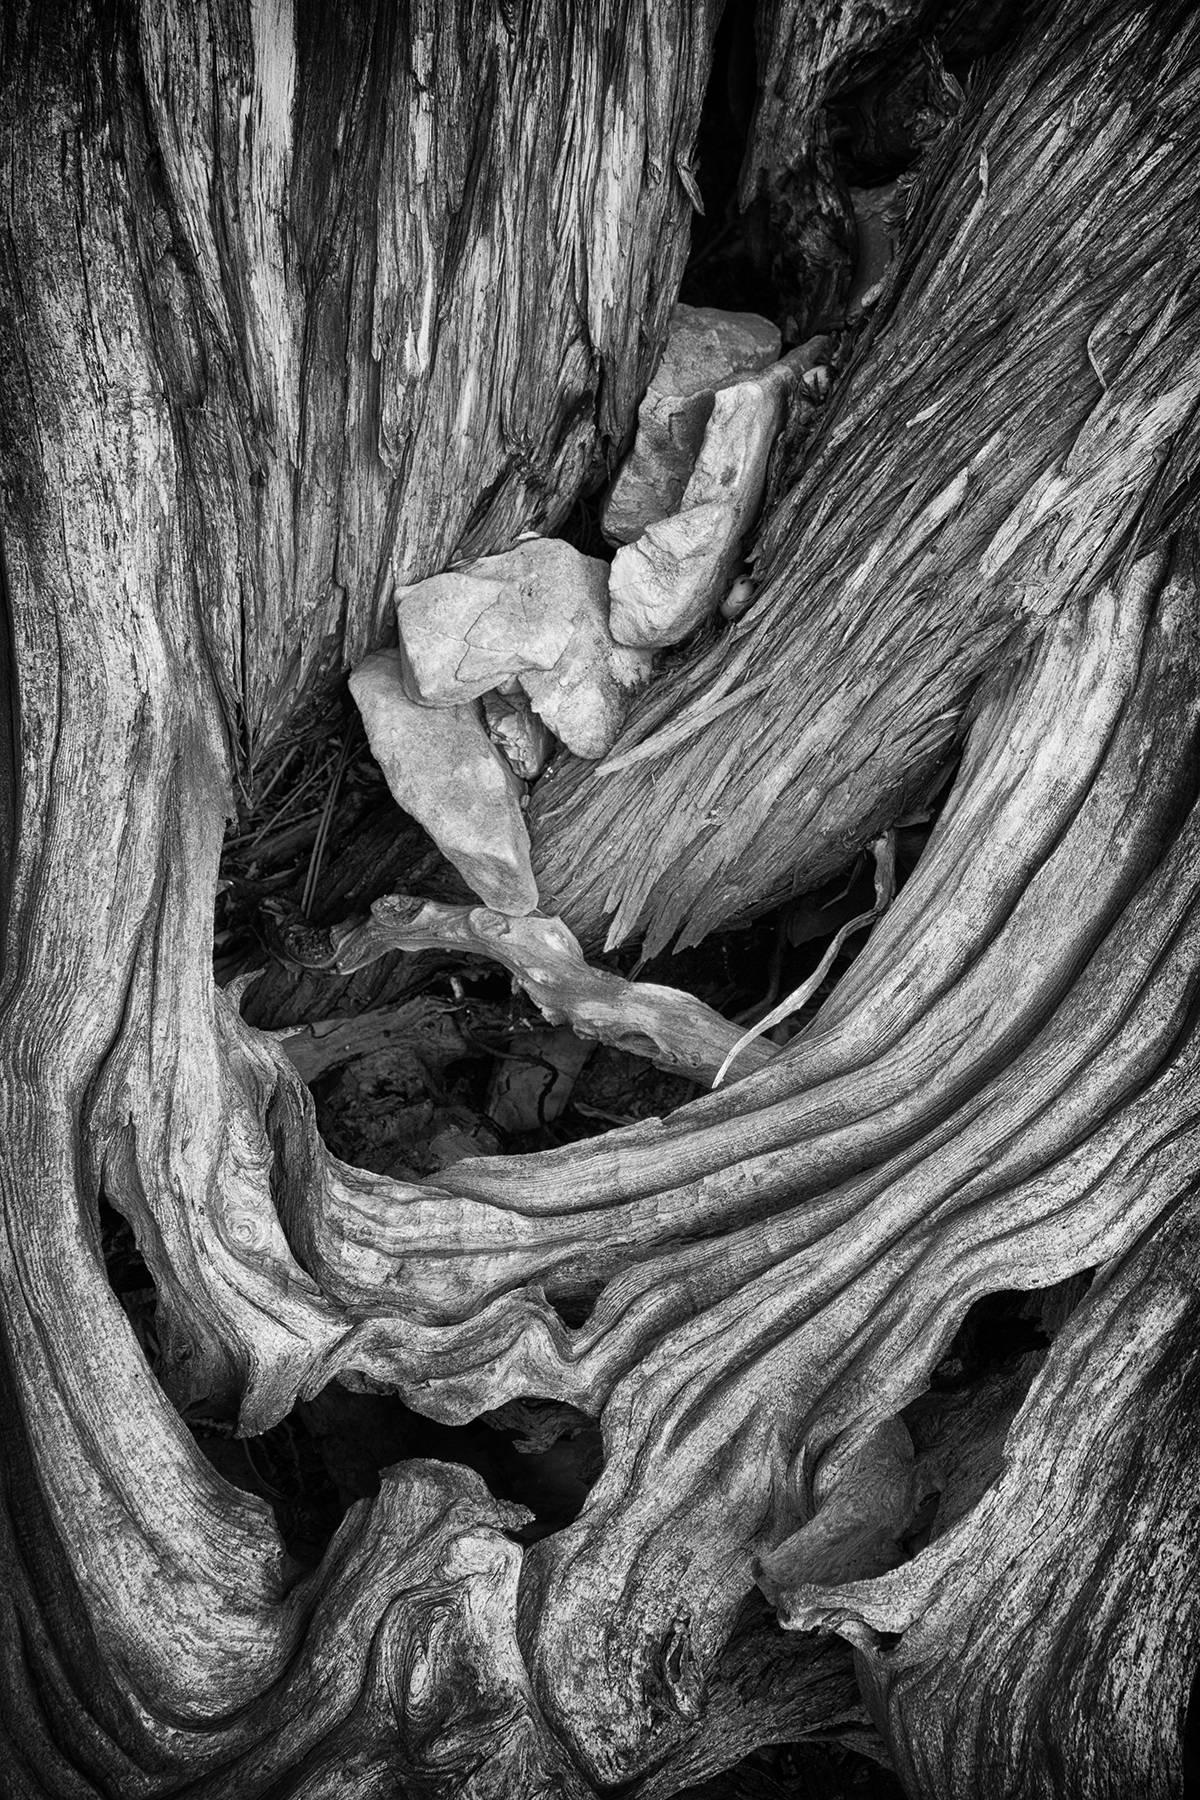 Rebecca Skinner Black and White Photograph - "Erosion #1", black and white, abstract, tree, roots, bark, landscape, photo